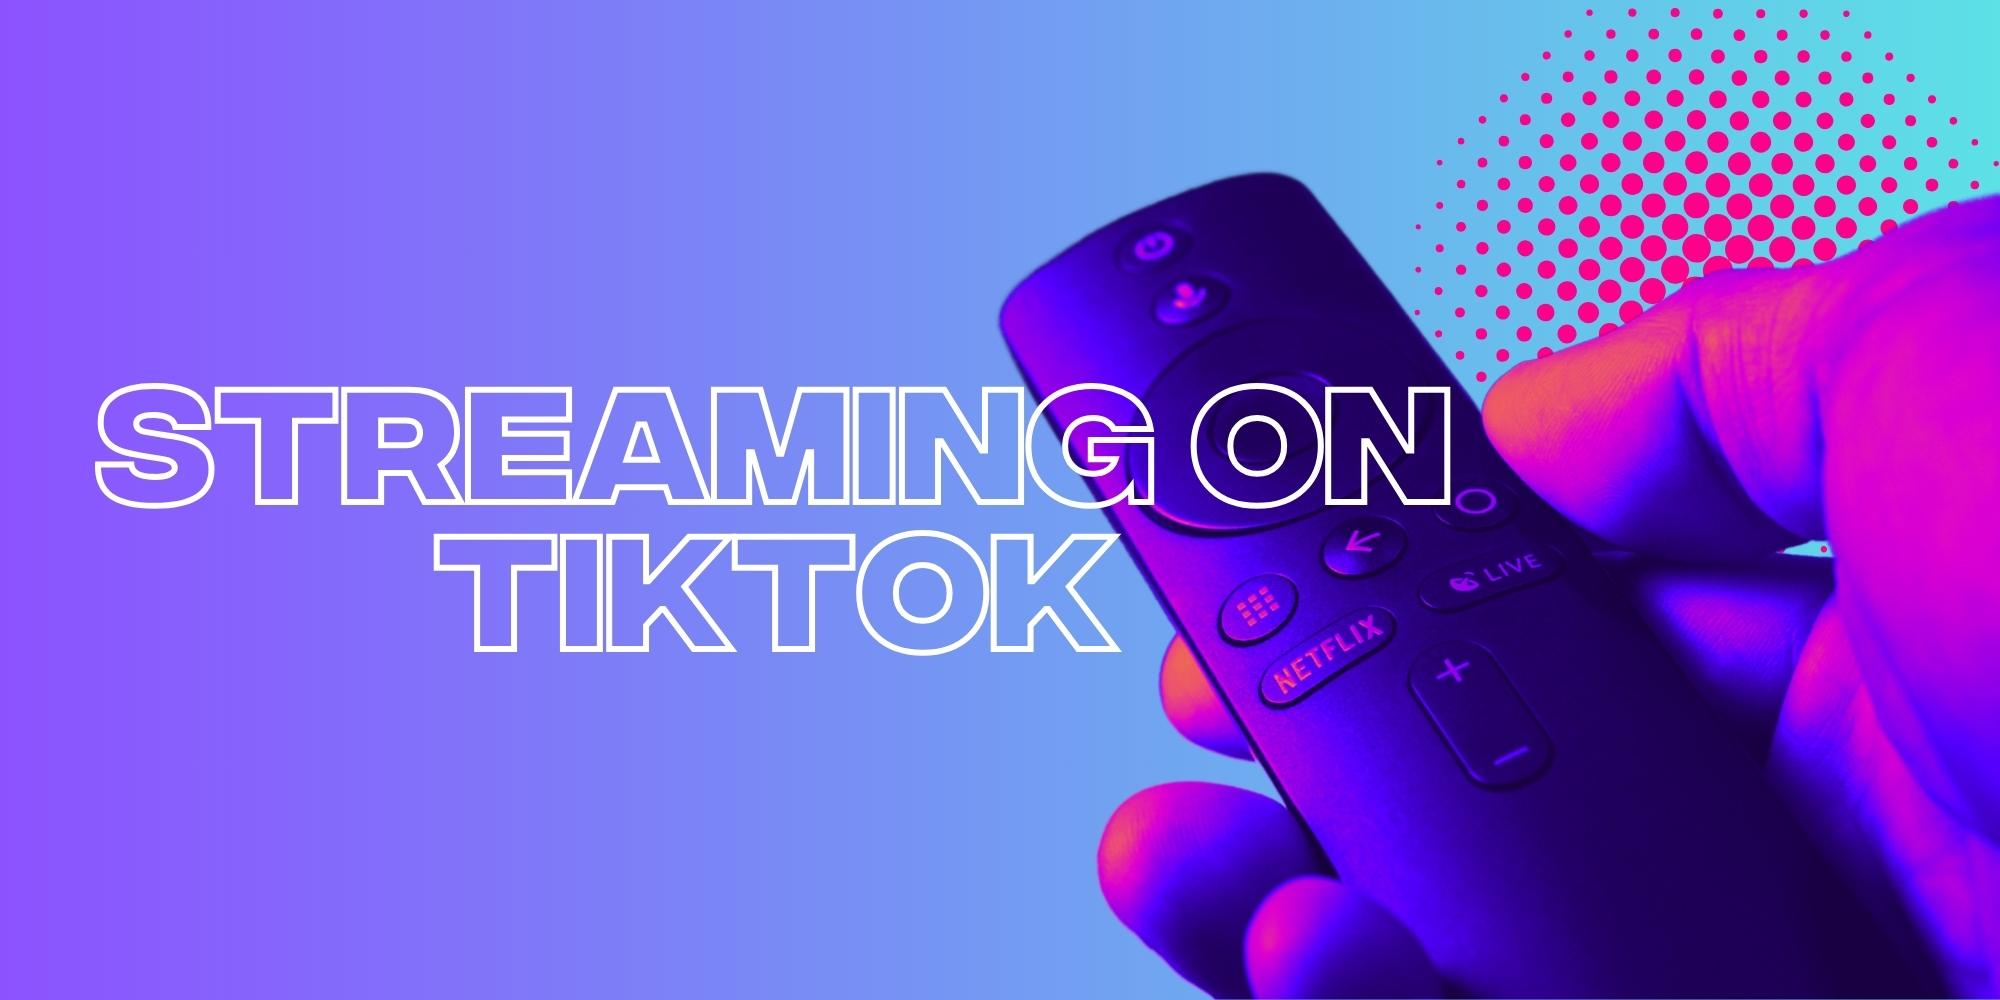 Is TikTok The New Streaming Service?